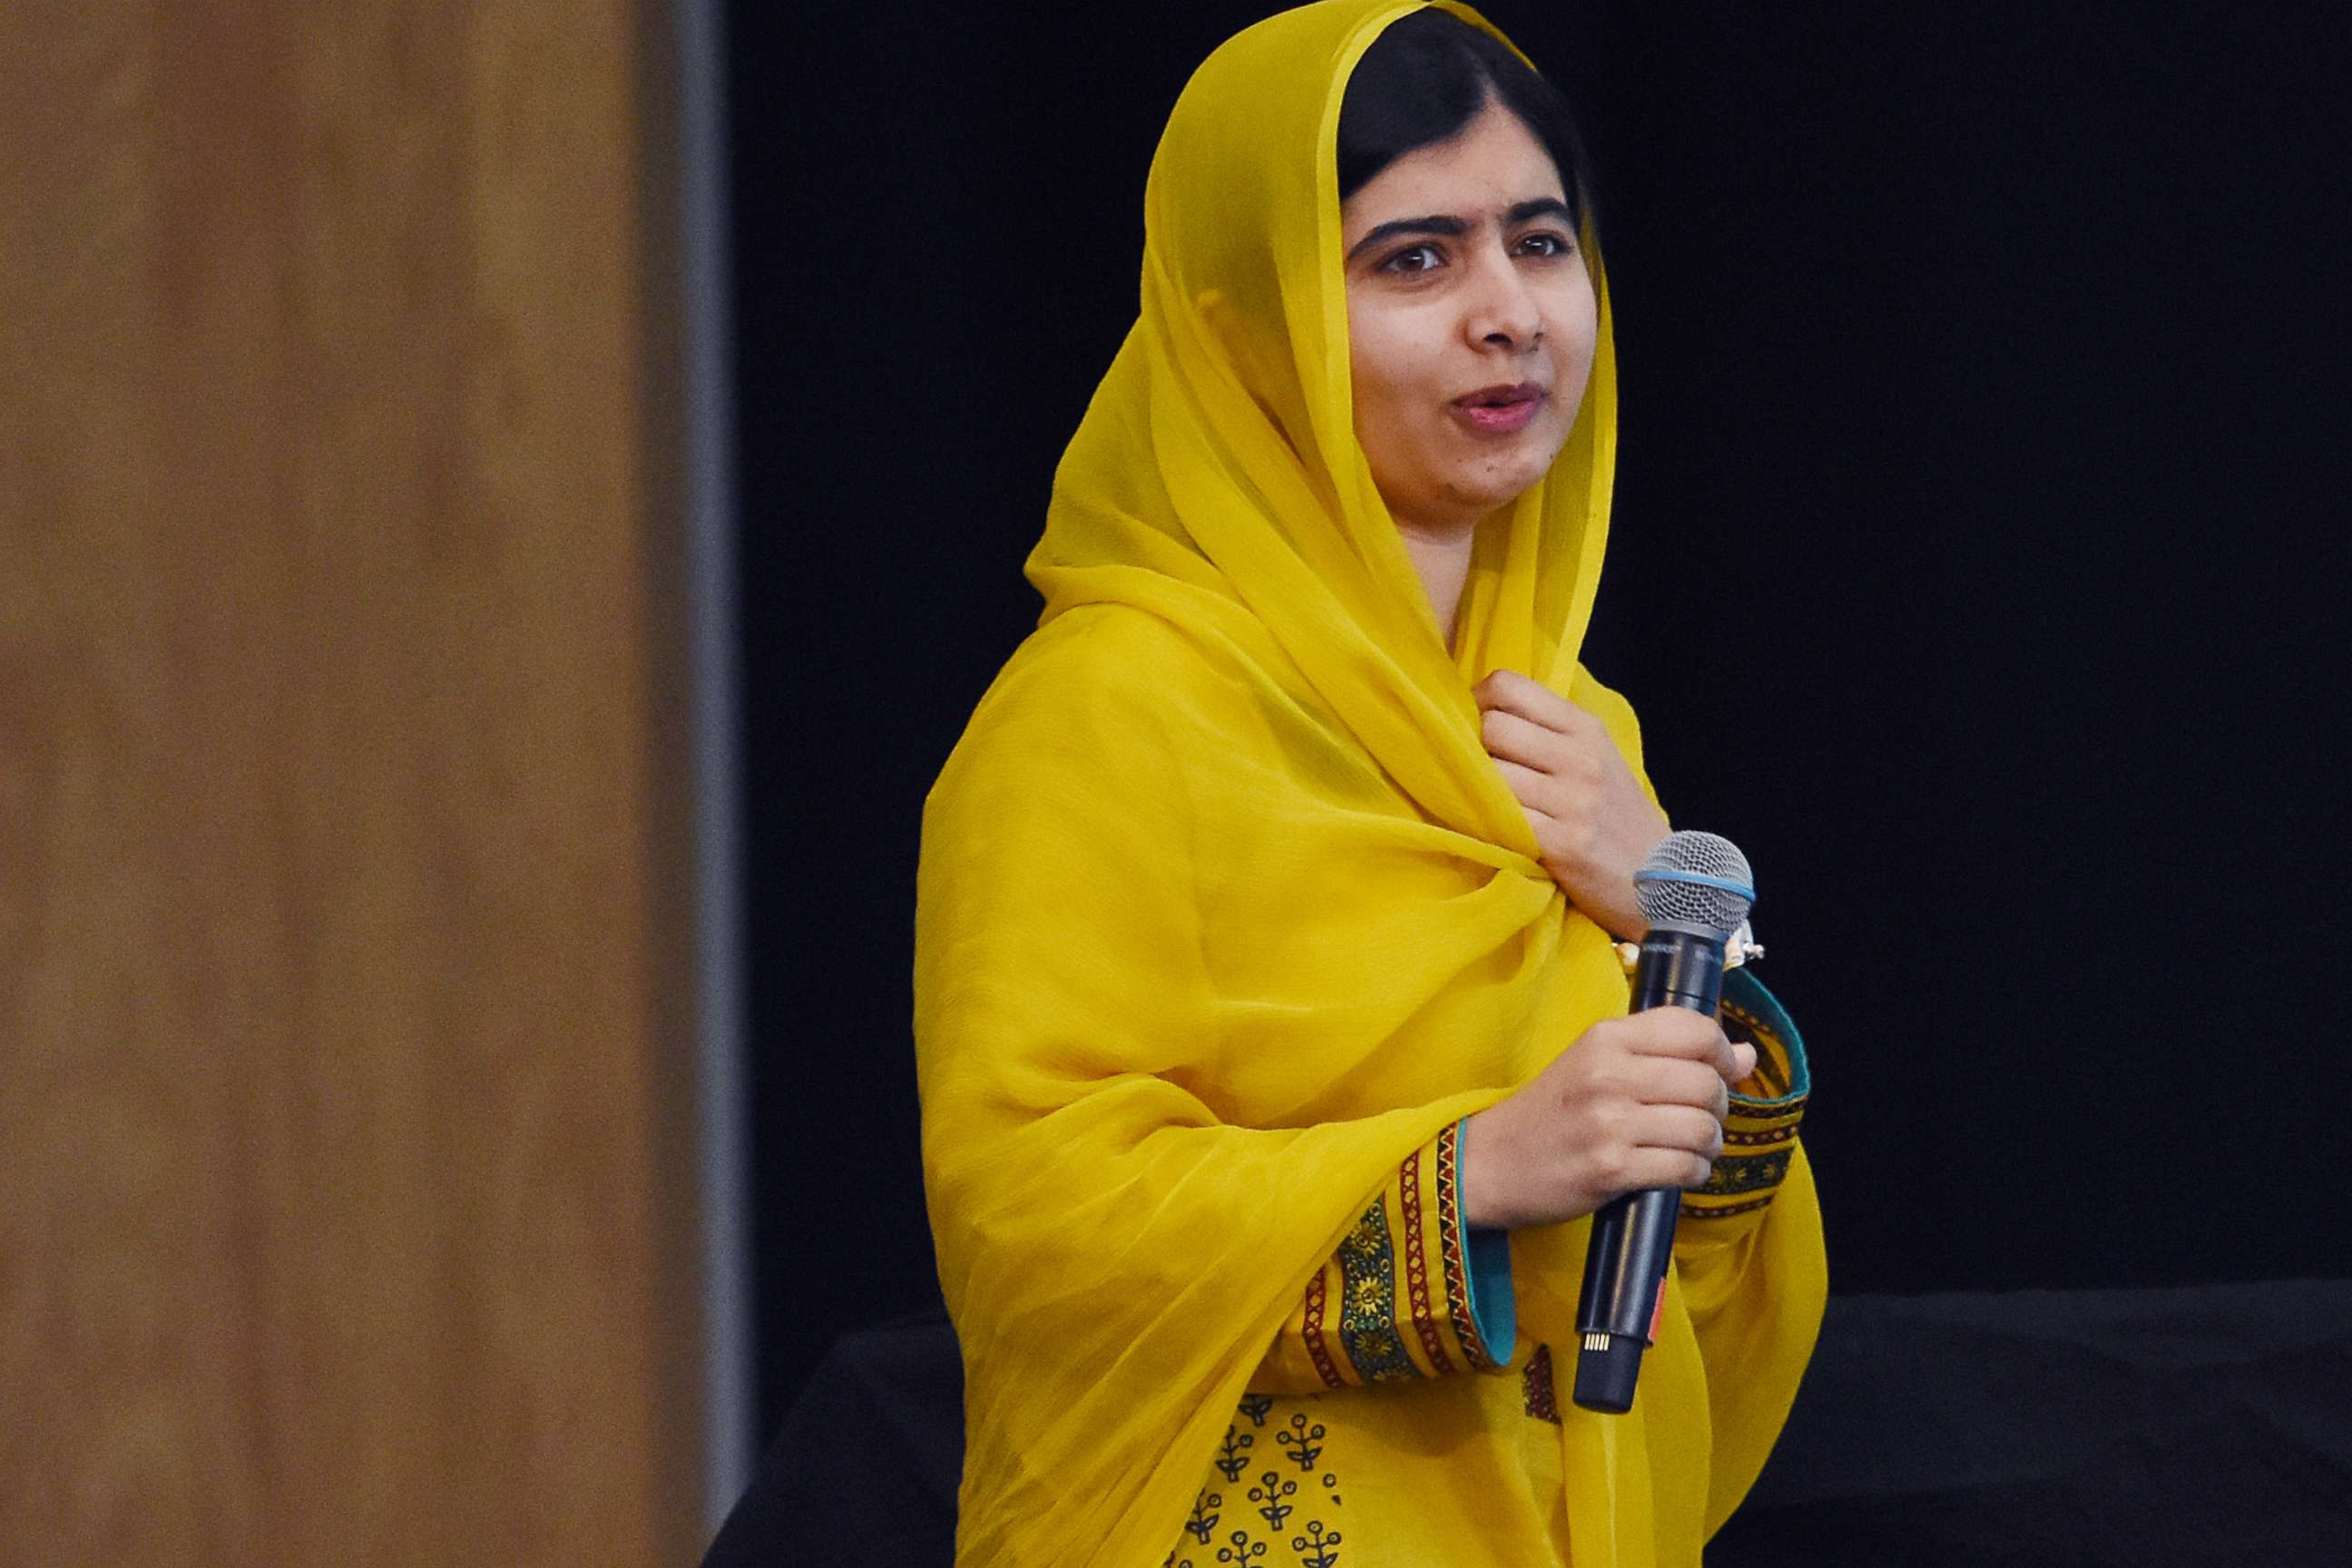 PHOTO: Pakistani Social Leader Malala Yousafzai is seen during  the 'Meeting with Malala' press conference at the Tecnologico de Monterrey University  as part of her working visit to Mexico in this Aug. 31, 2017 in Mexico City, Mexico.